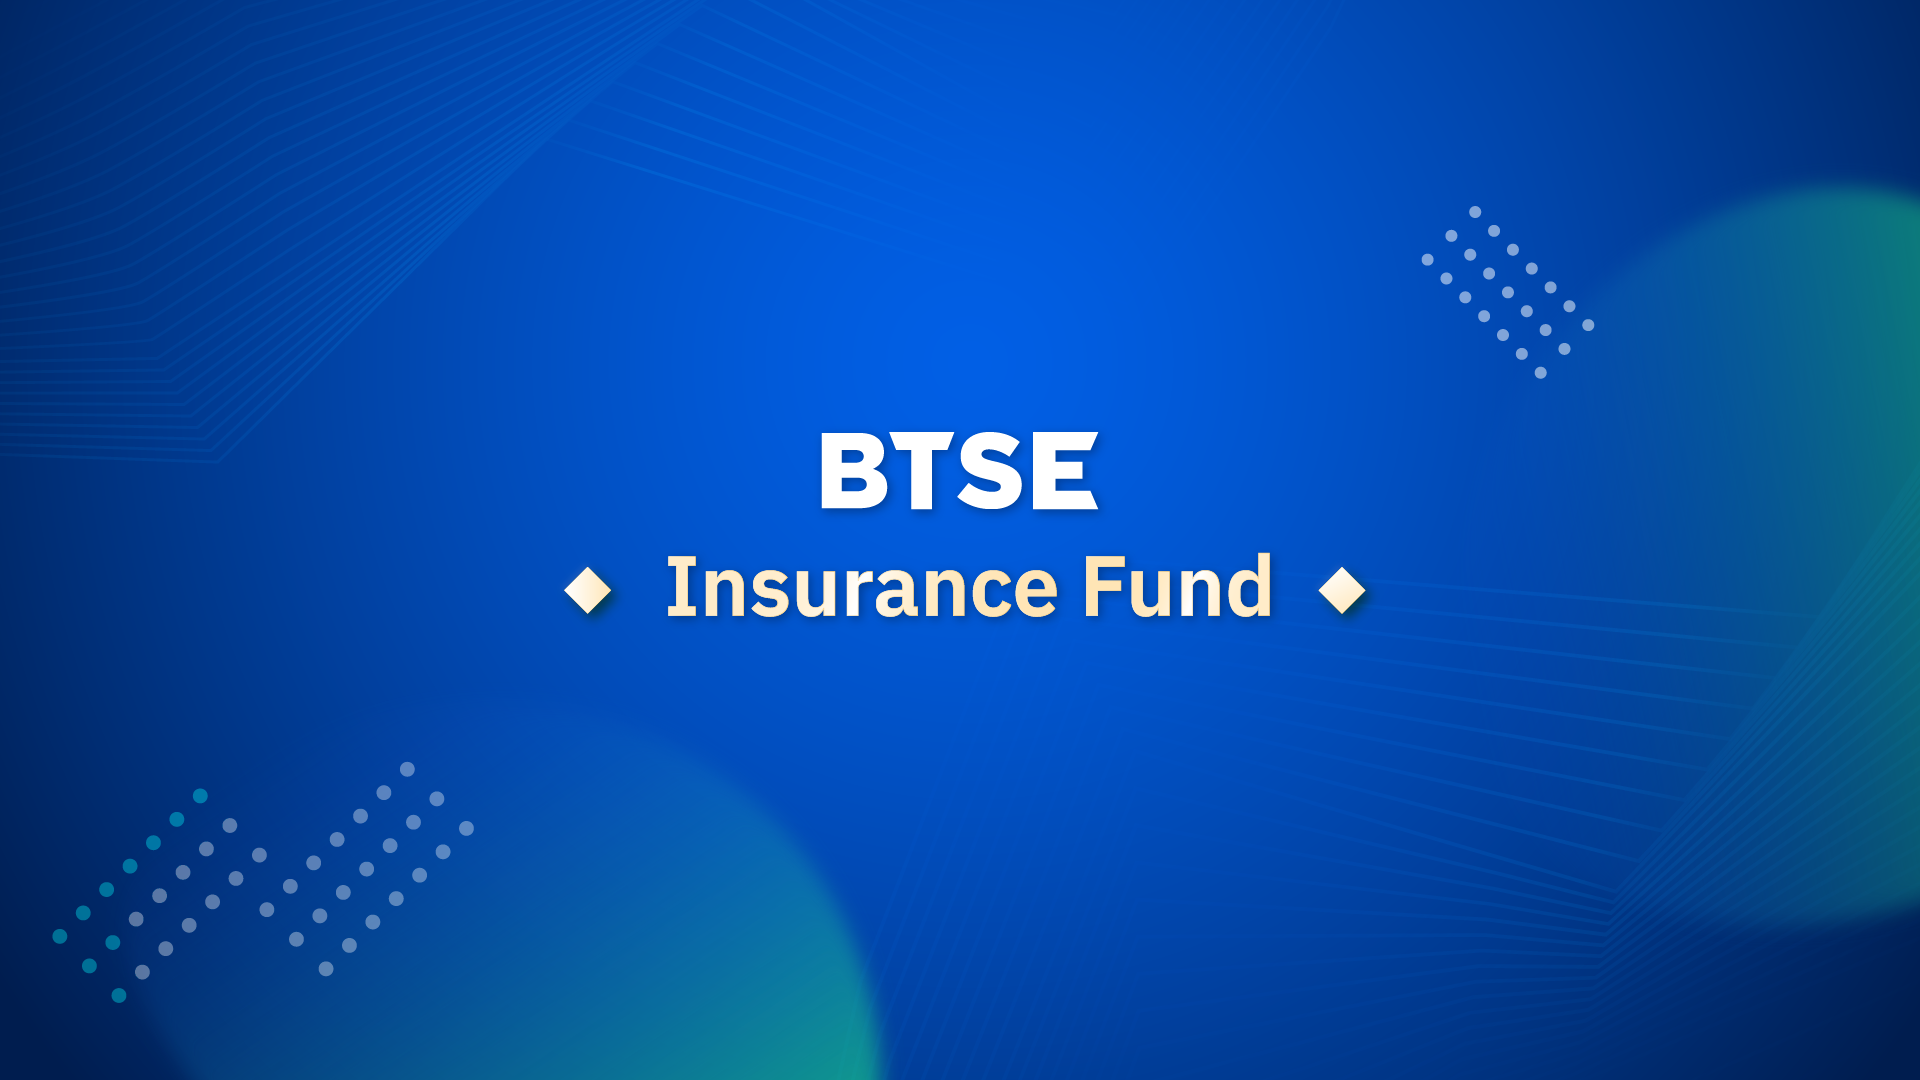 Security and Added Protection: BTSE Insurance Fund